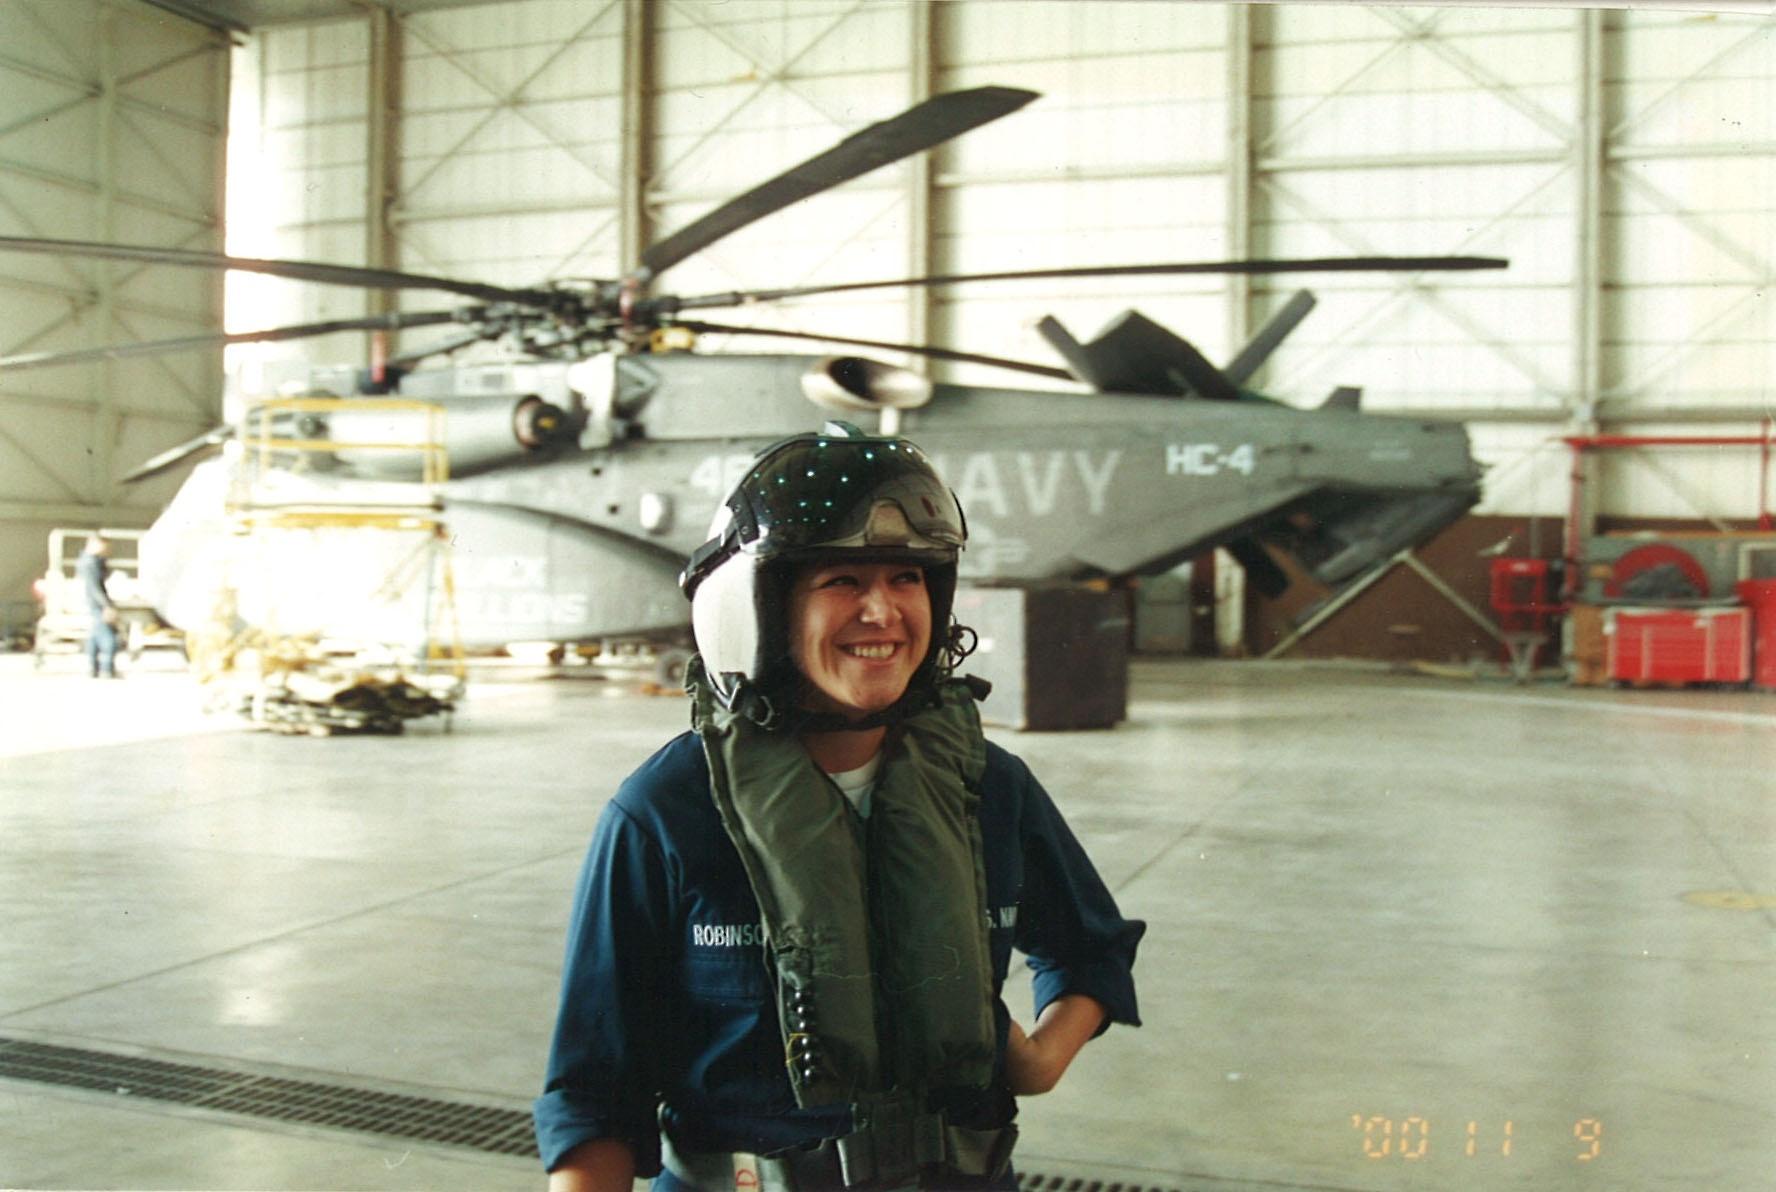 Elizabeth Perez, Navy with helicopter in background